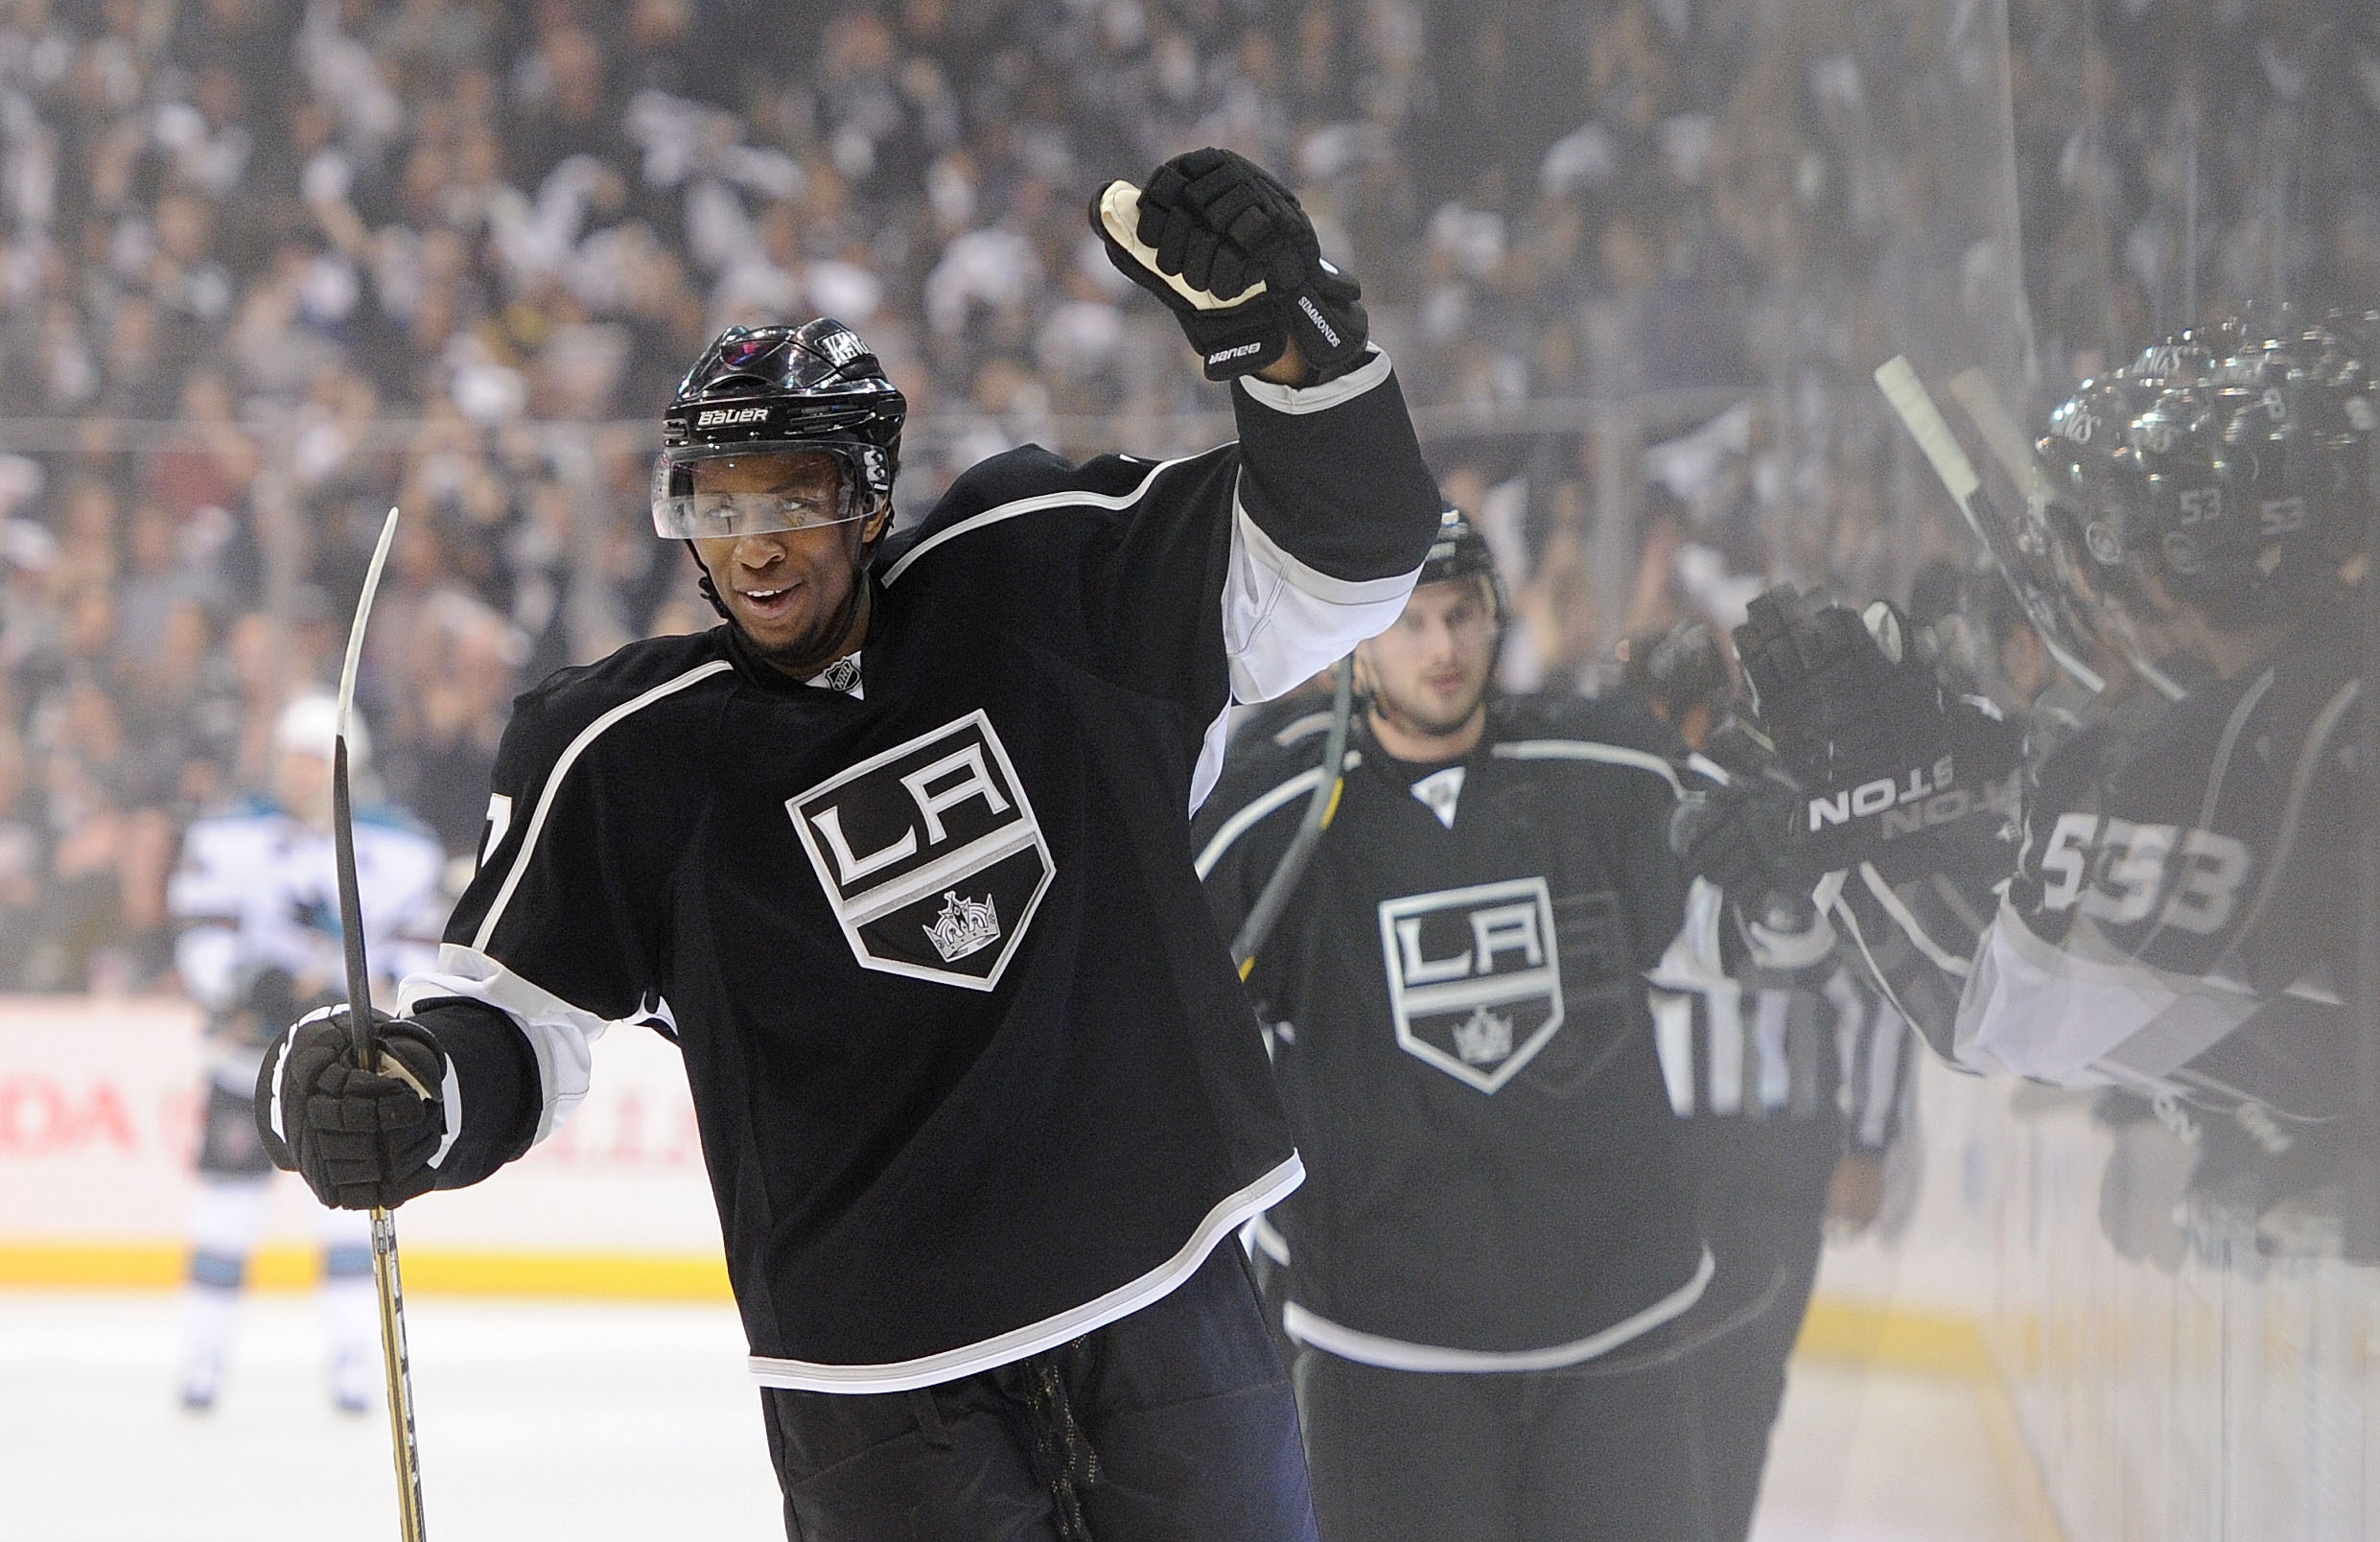 LOS ANGELES, CA - APRIL 19:  Wayne Simmonds #17 of the Los Angeles Kings celebrates after an assist on a goal by Kyle Clifford #13 against the San Jose Sharks in game three of the Western Conference Quarterfinals during the 2011 NHL Stanley Cup Playoffs a